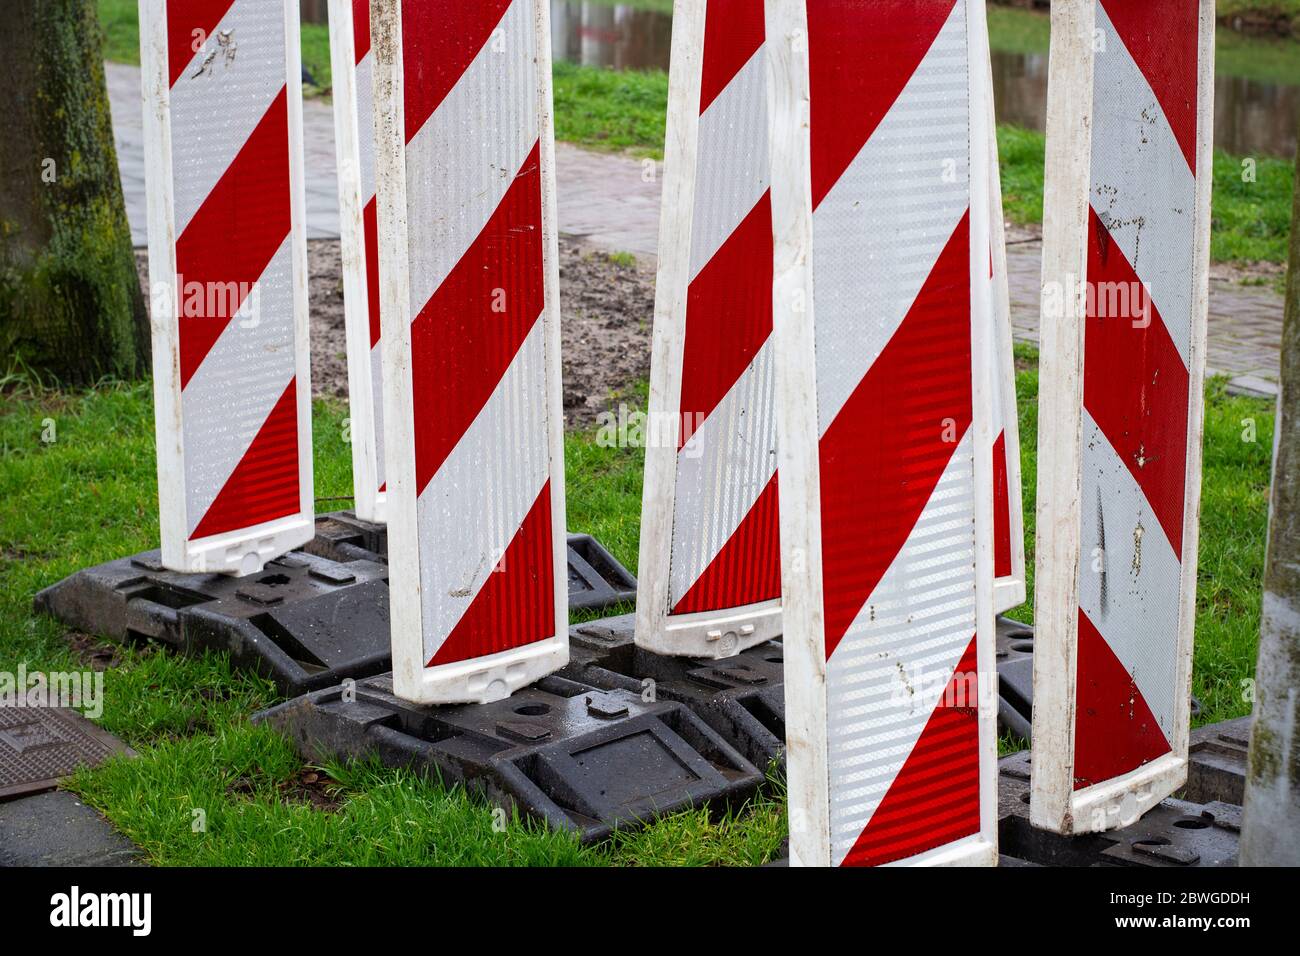 Red & white reflective roadblock barricades for directing traffic during roadwork or maintenance in a construction zone. Concept of traffic safety Stock Photo